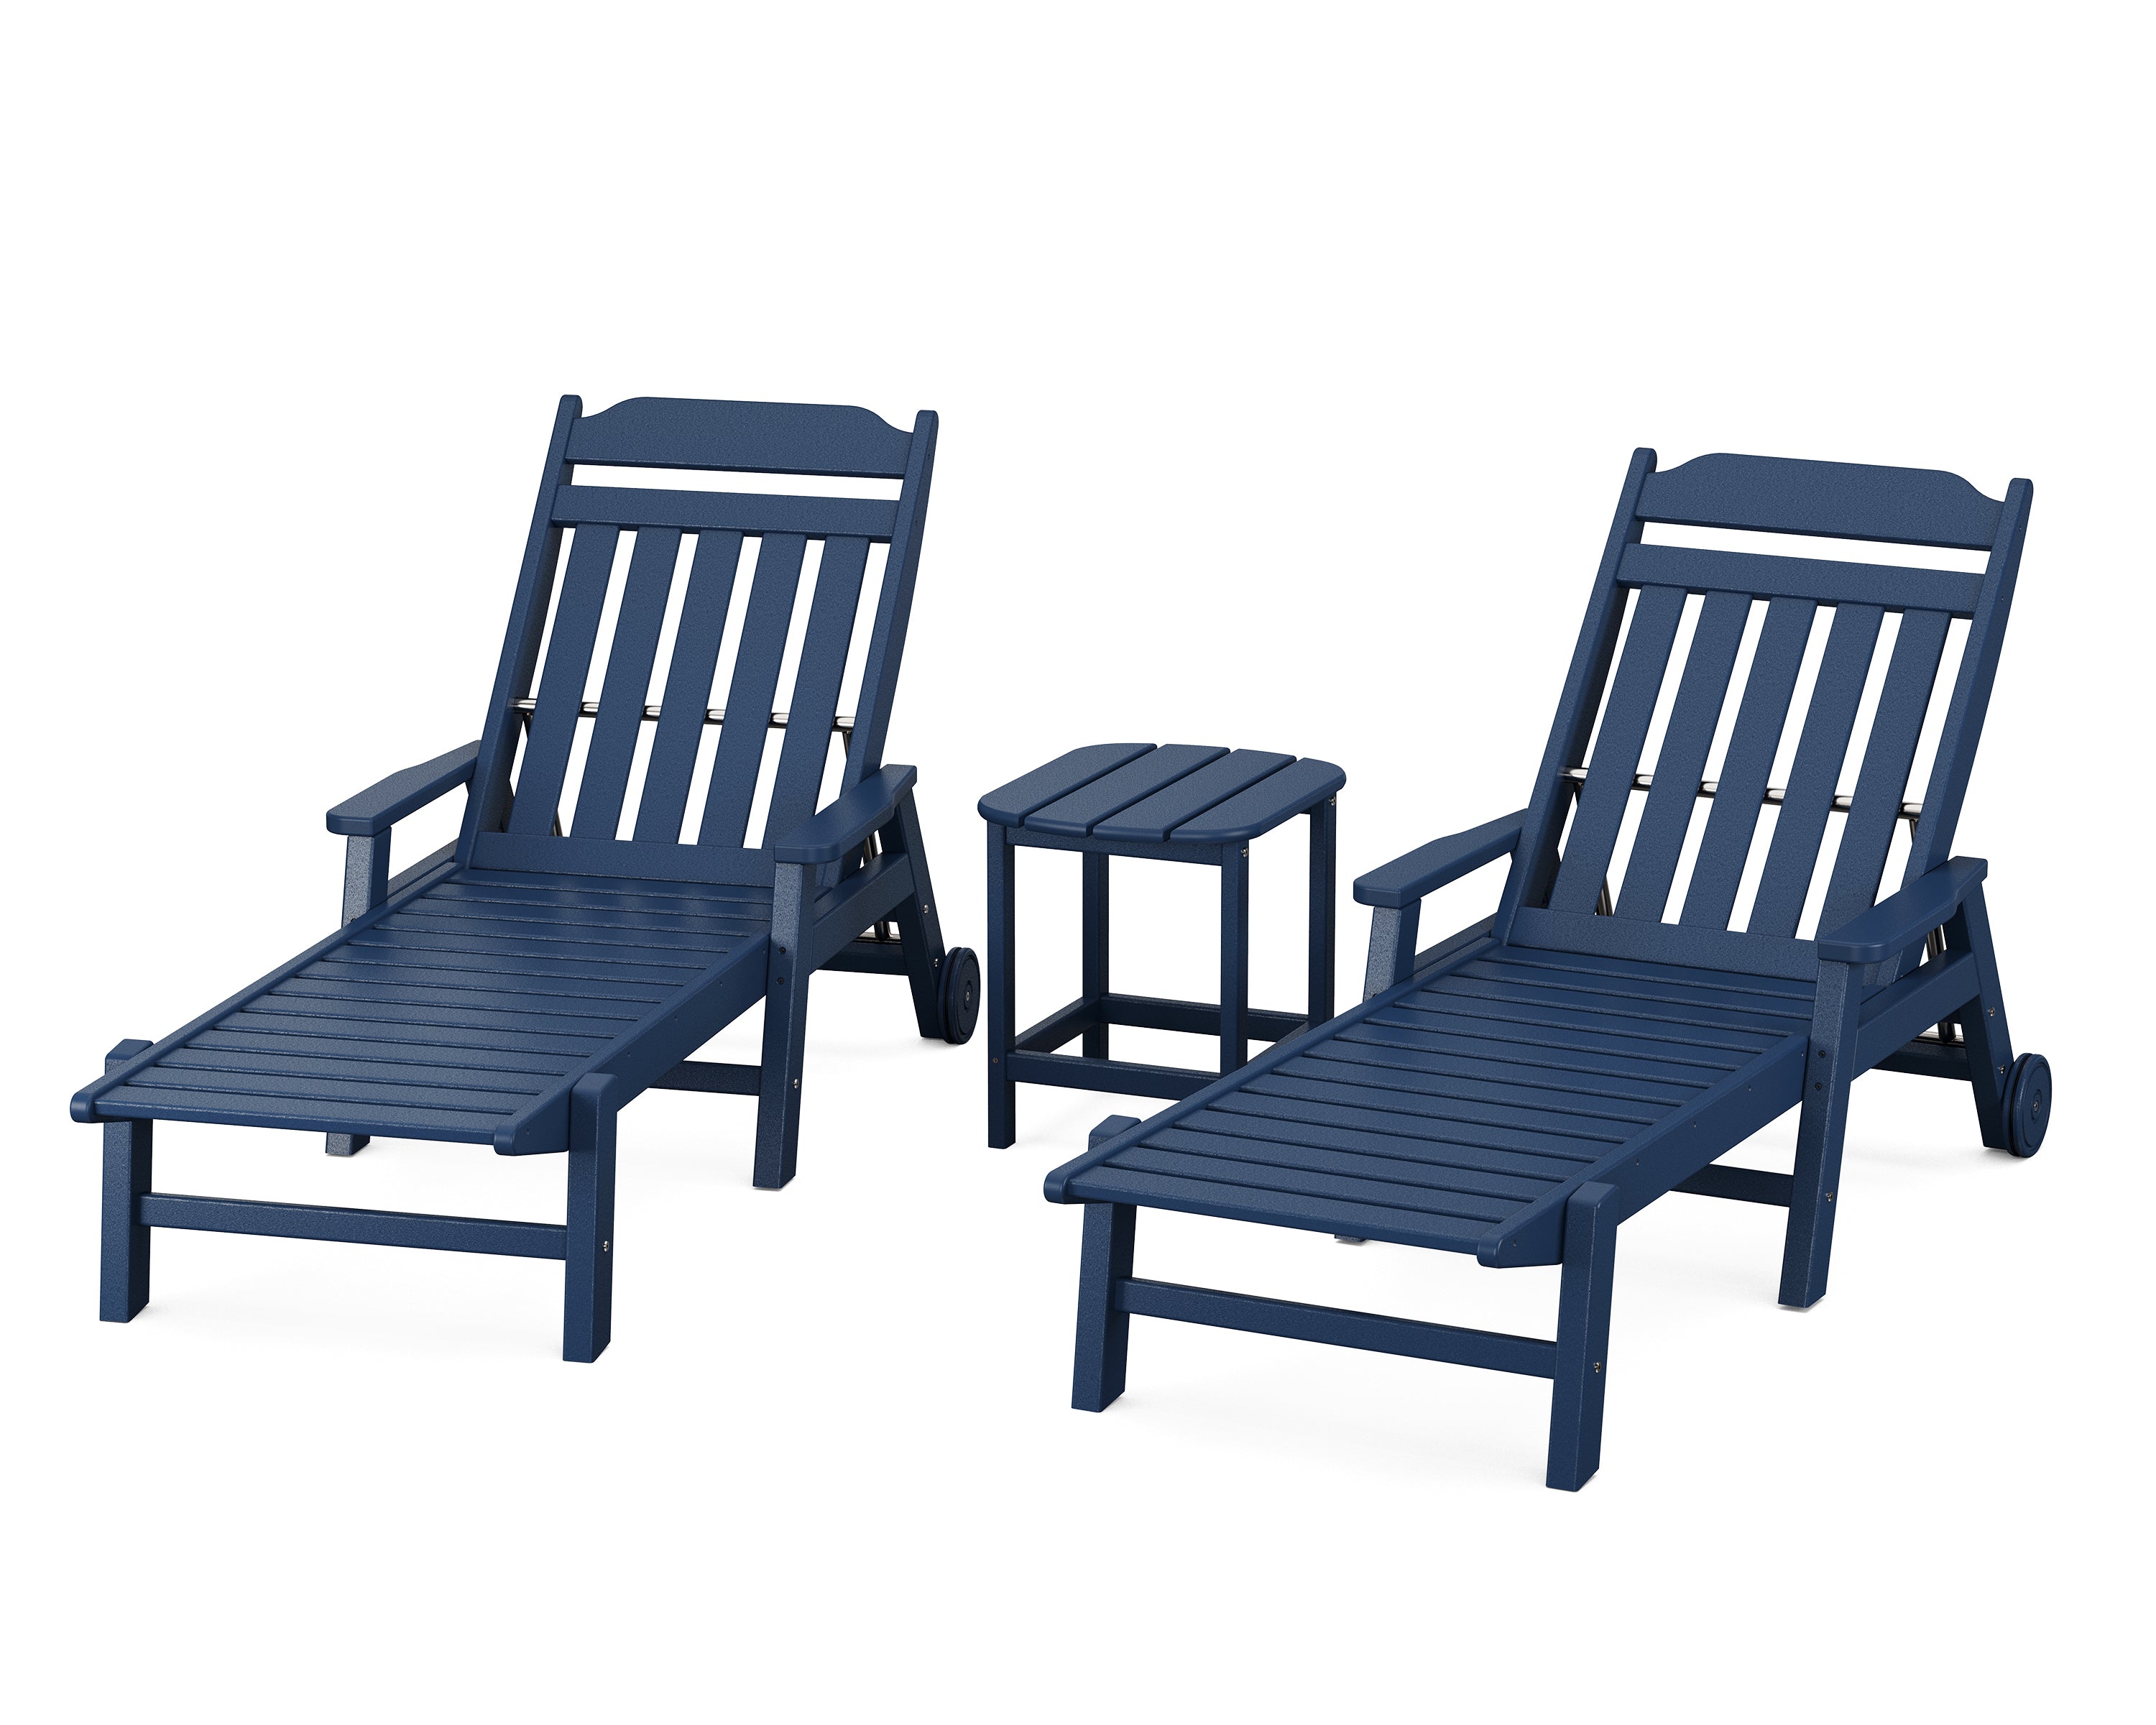 POLYWOOD Country Living 3-Piece Chaise Set with Arms and Wheels in Navy